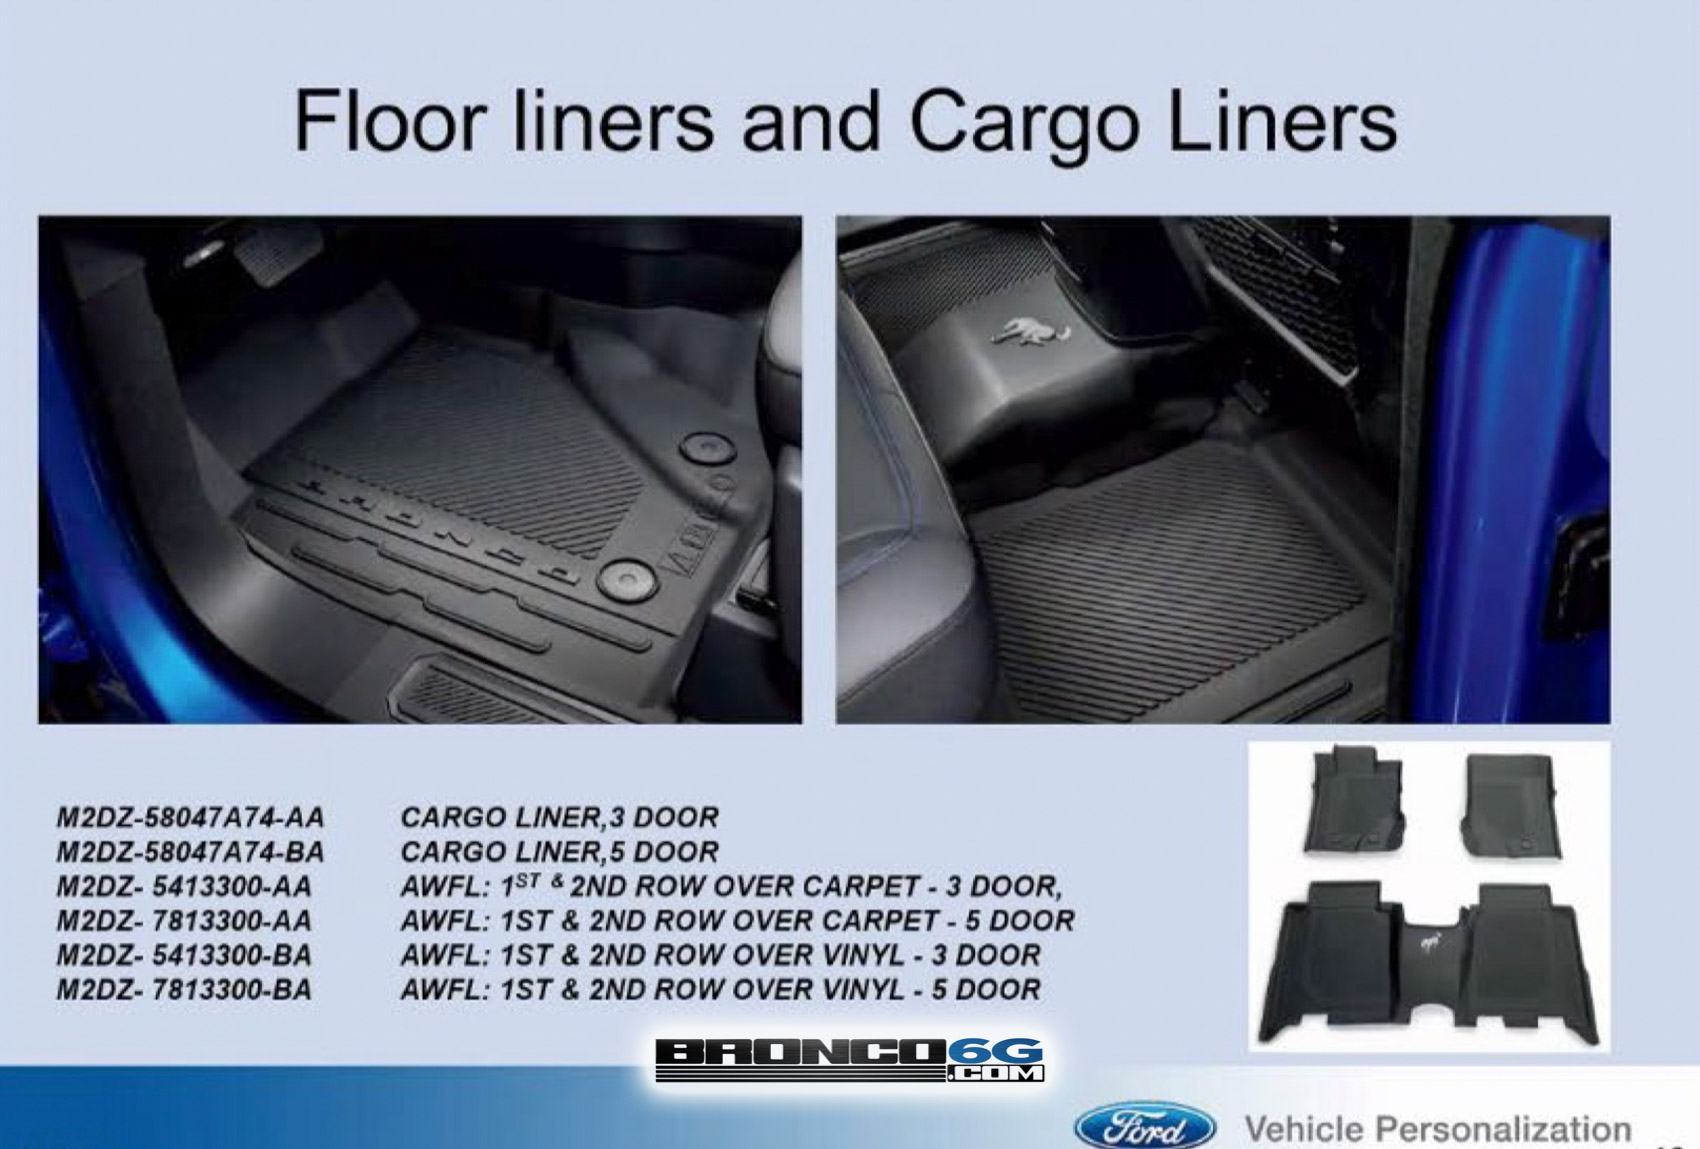 2021 Bronco Floor Liners Cargo Liners - Ford Performance OEM factory accessory.jpg